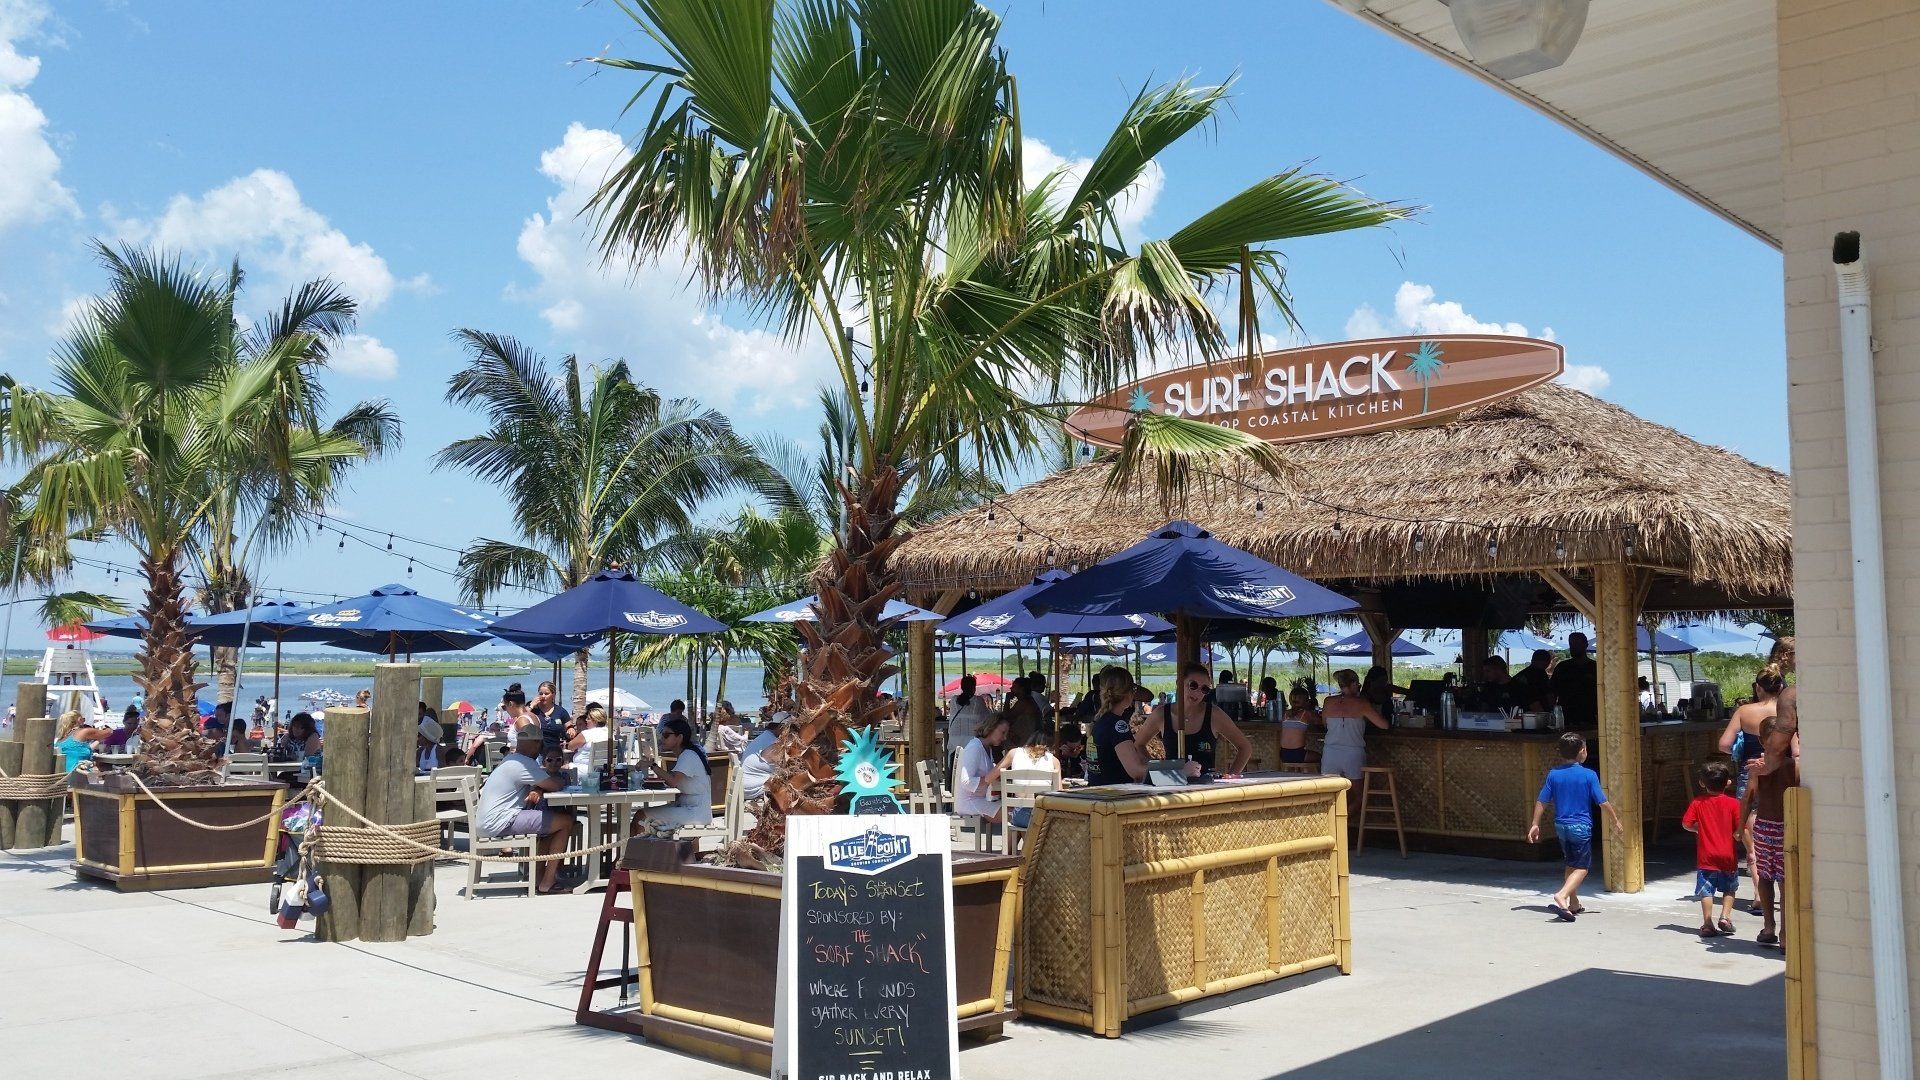 Outdoor bar and grill on the beach.